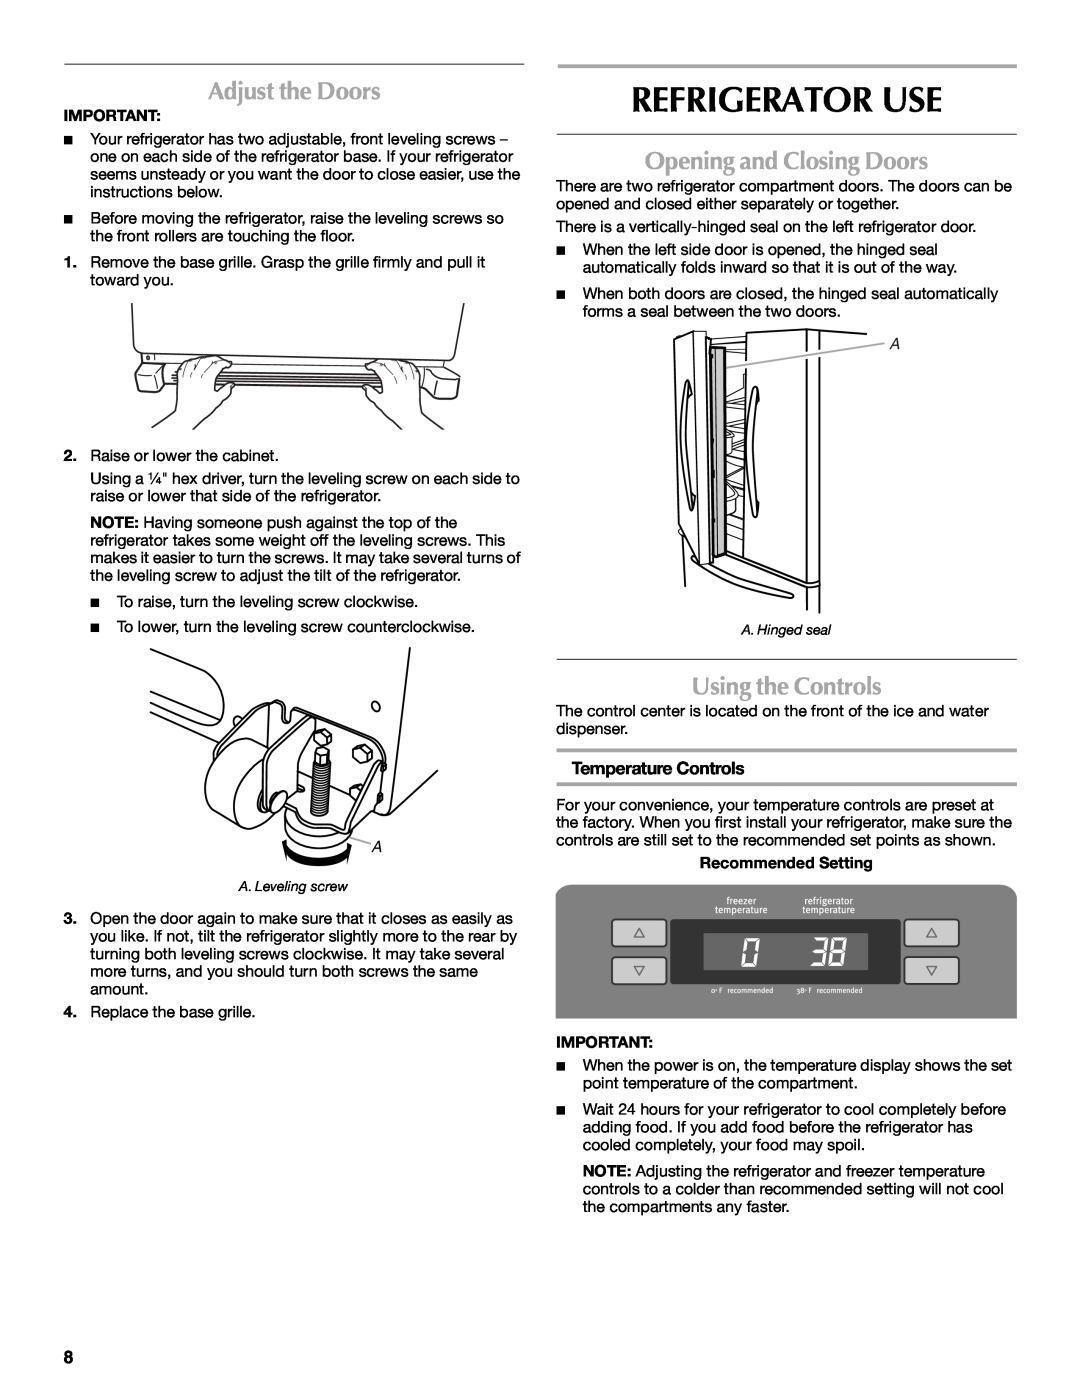 Maytag MFI2269VEM Refrigerator Use, Adjust the Doors, Opening and Closing Doors, Using the Controls, Temperature Controls 